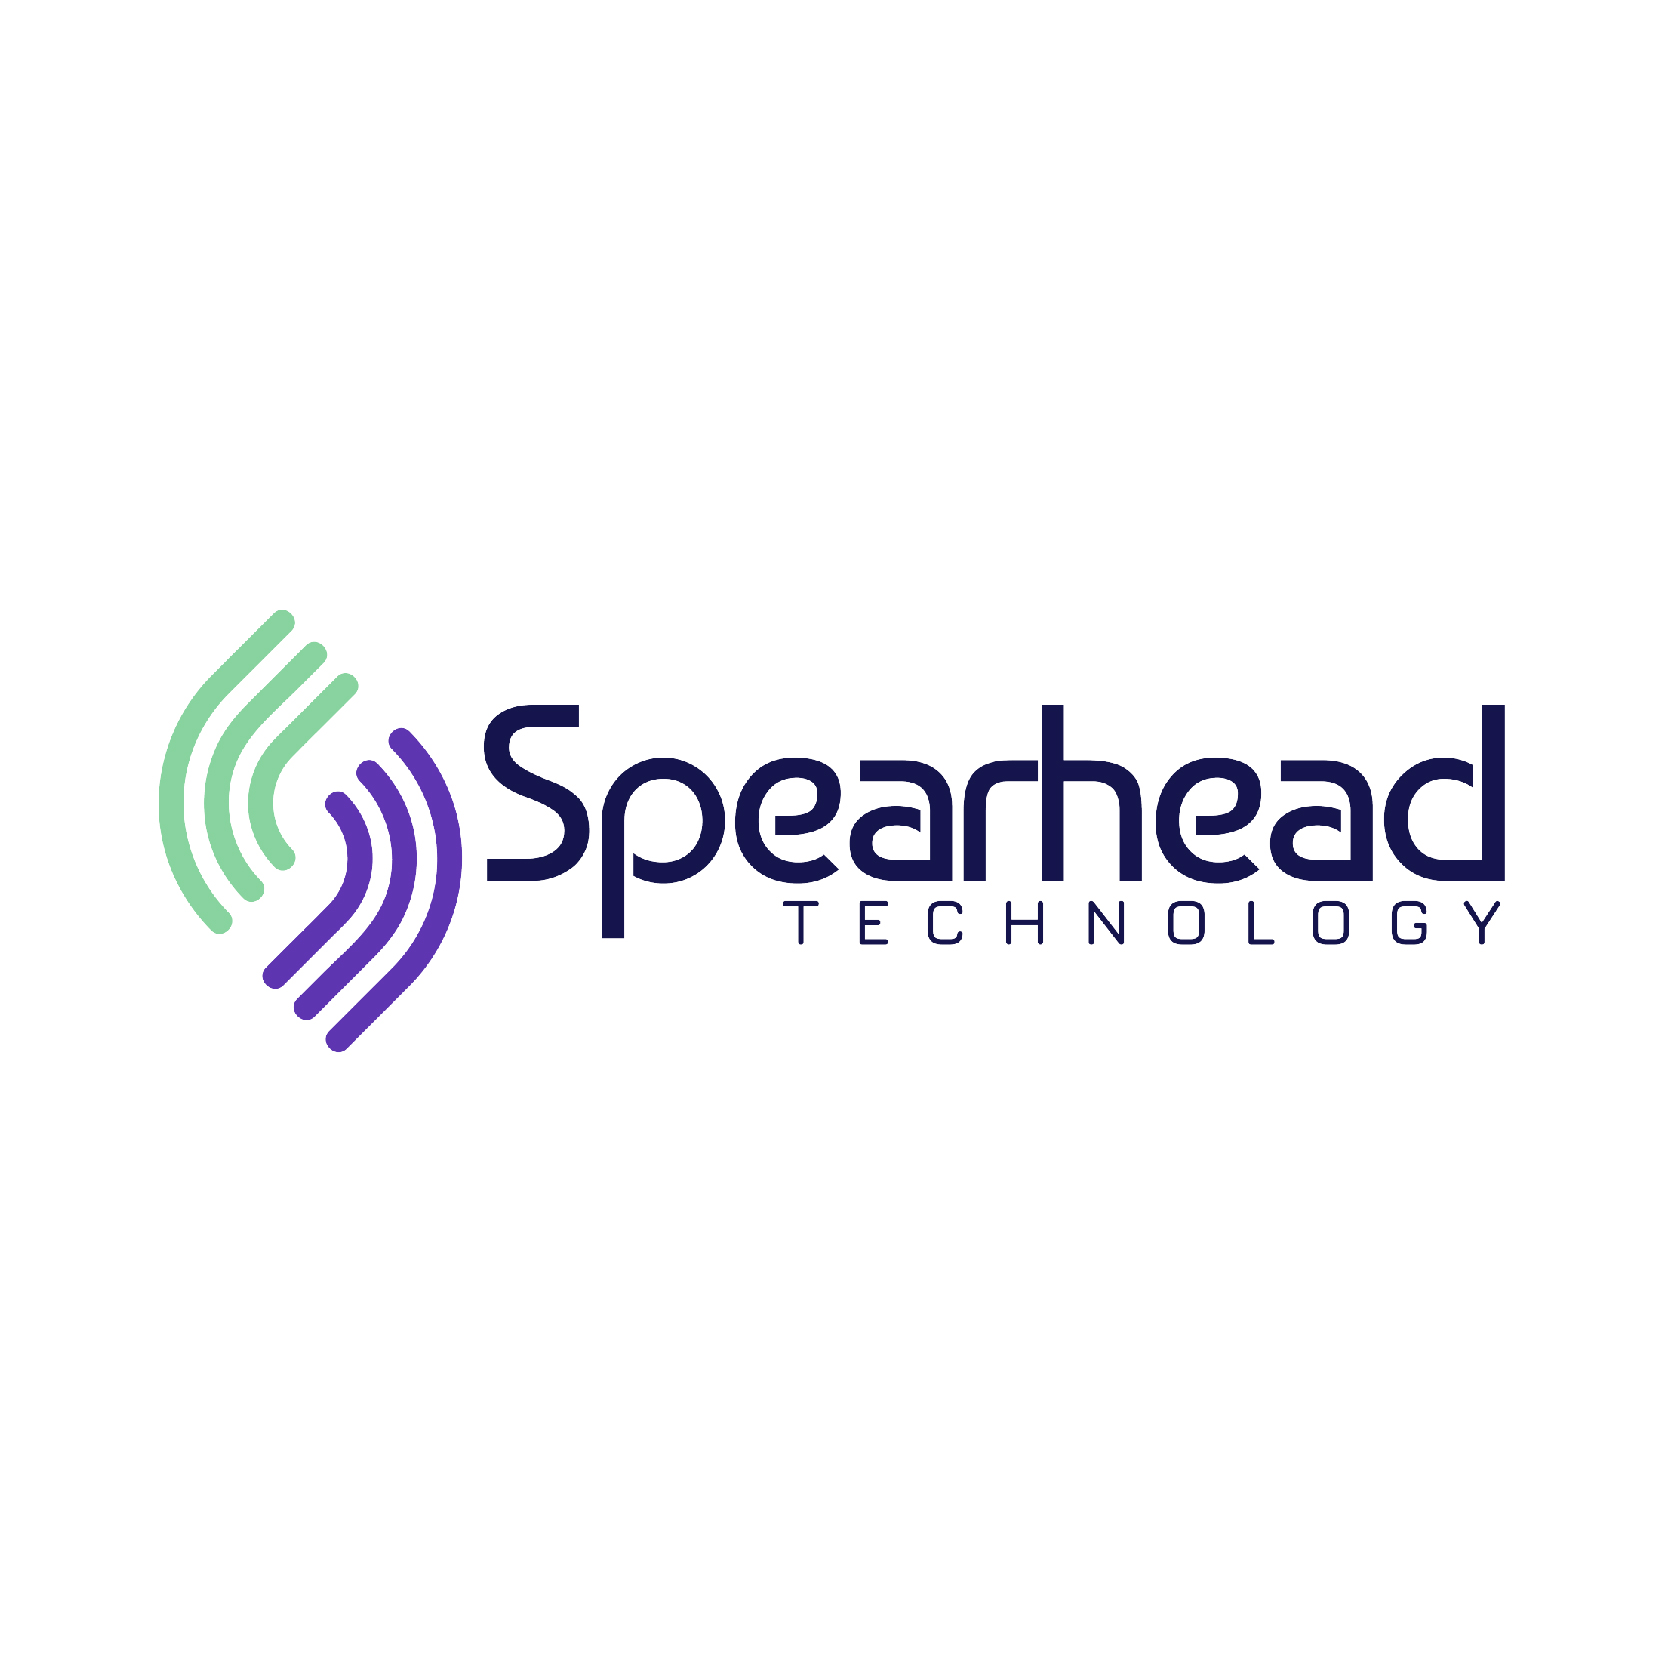  Spearhead Technology: Shaping the Future of Technology in Bengaluru, India